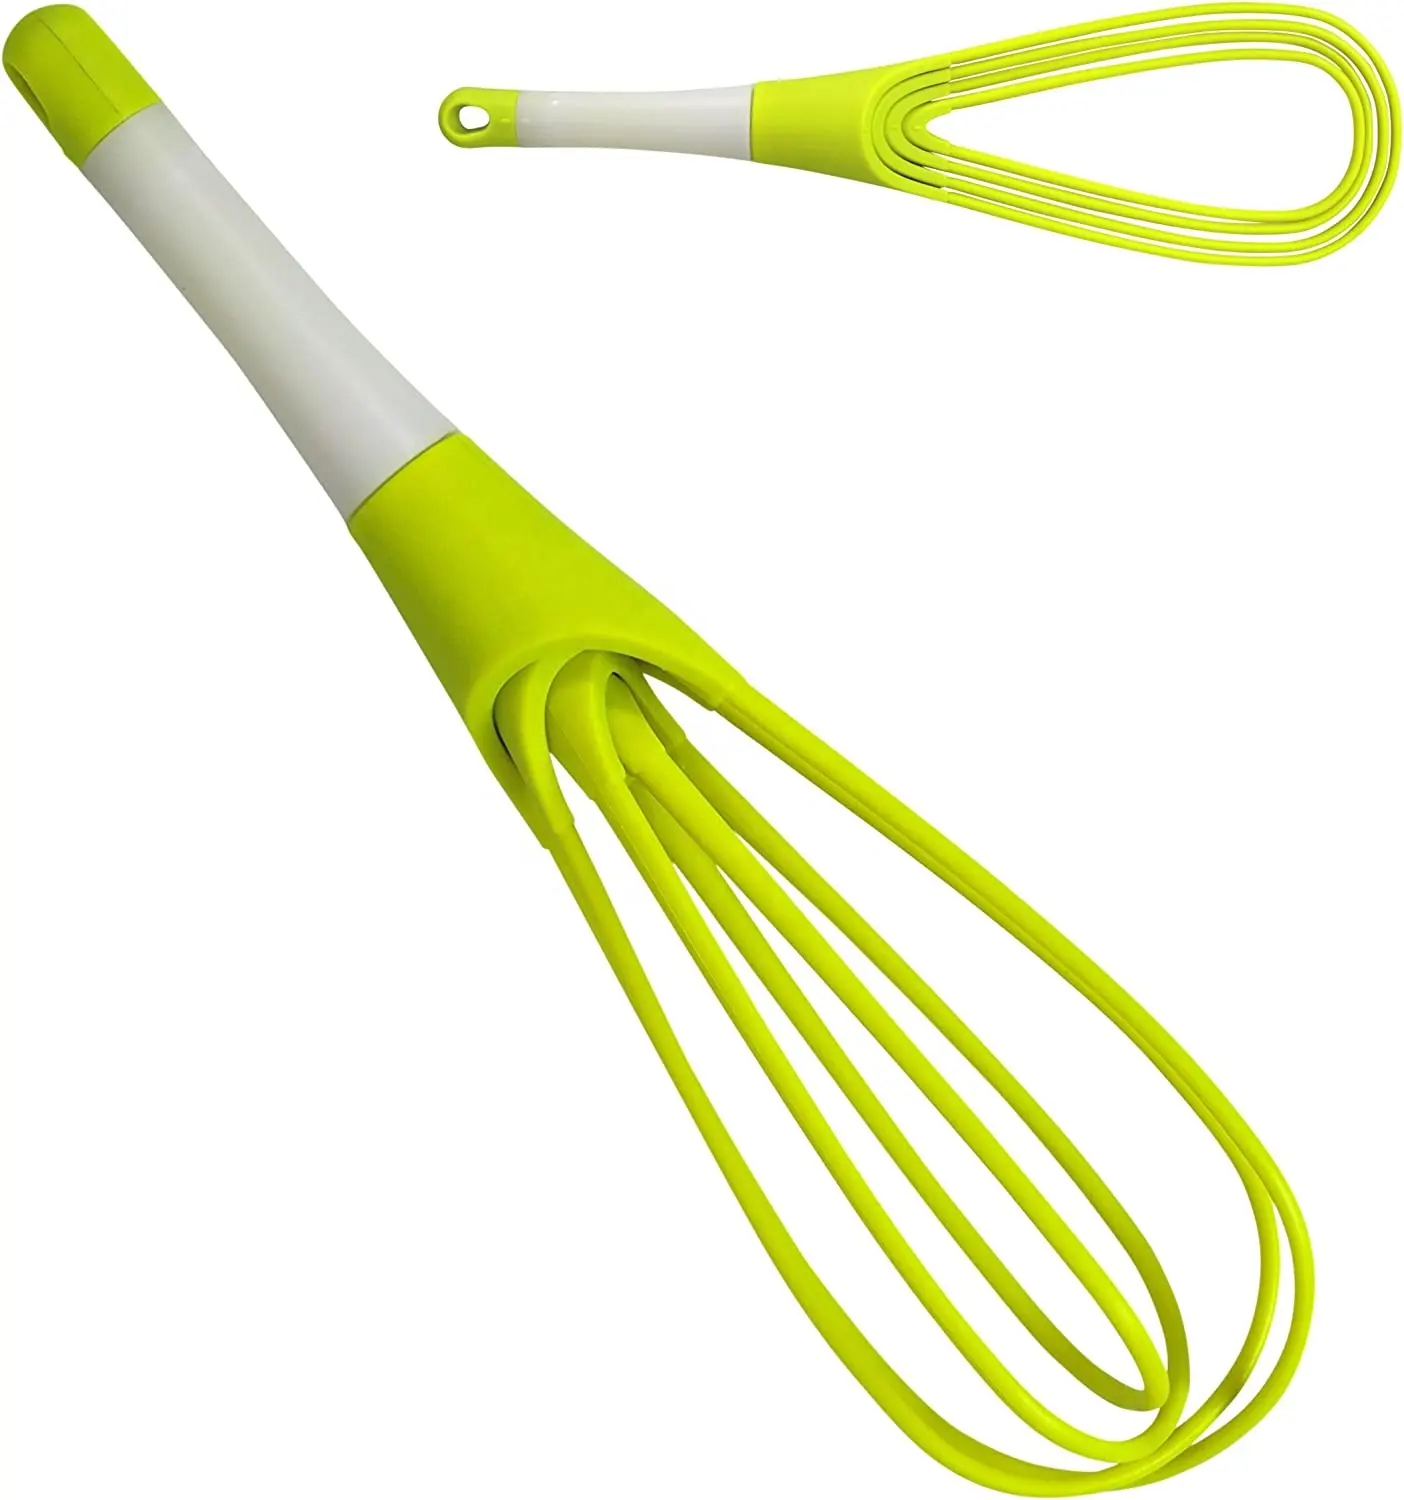 Terrific Looking Twist Whisk 2-In-1 Collapsible Balloon and Flat Whisk